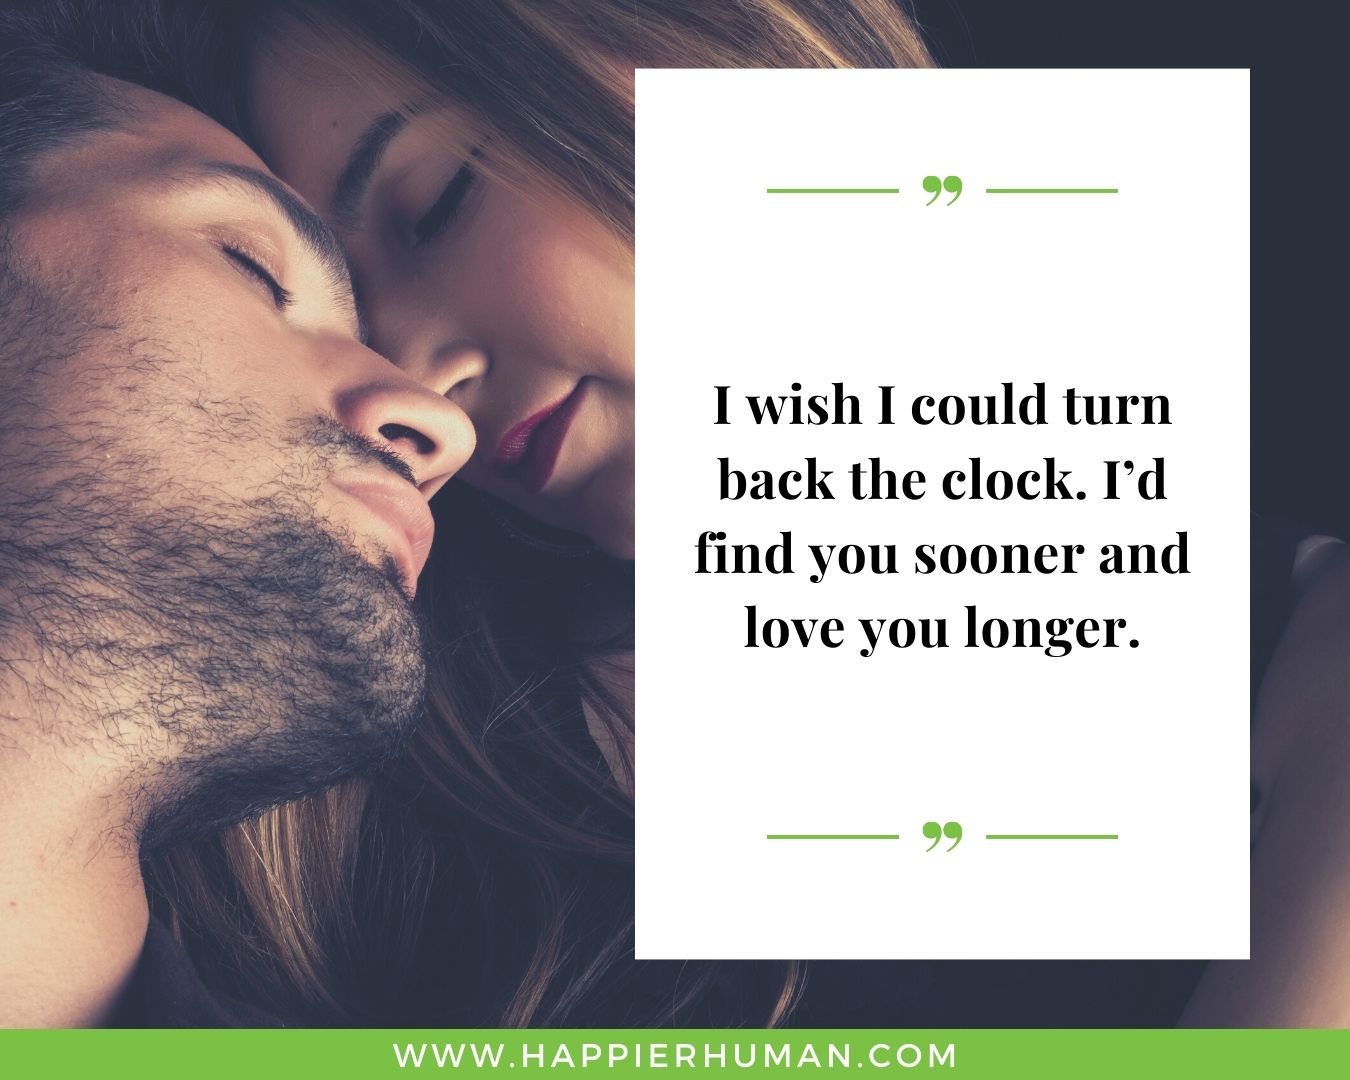 50 Passionate Love Quotes for Her